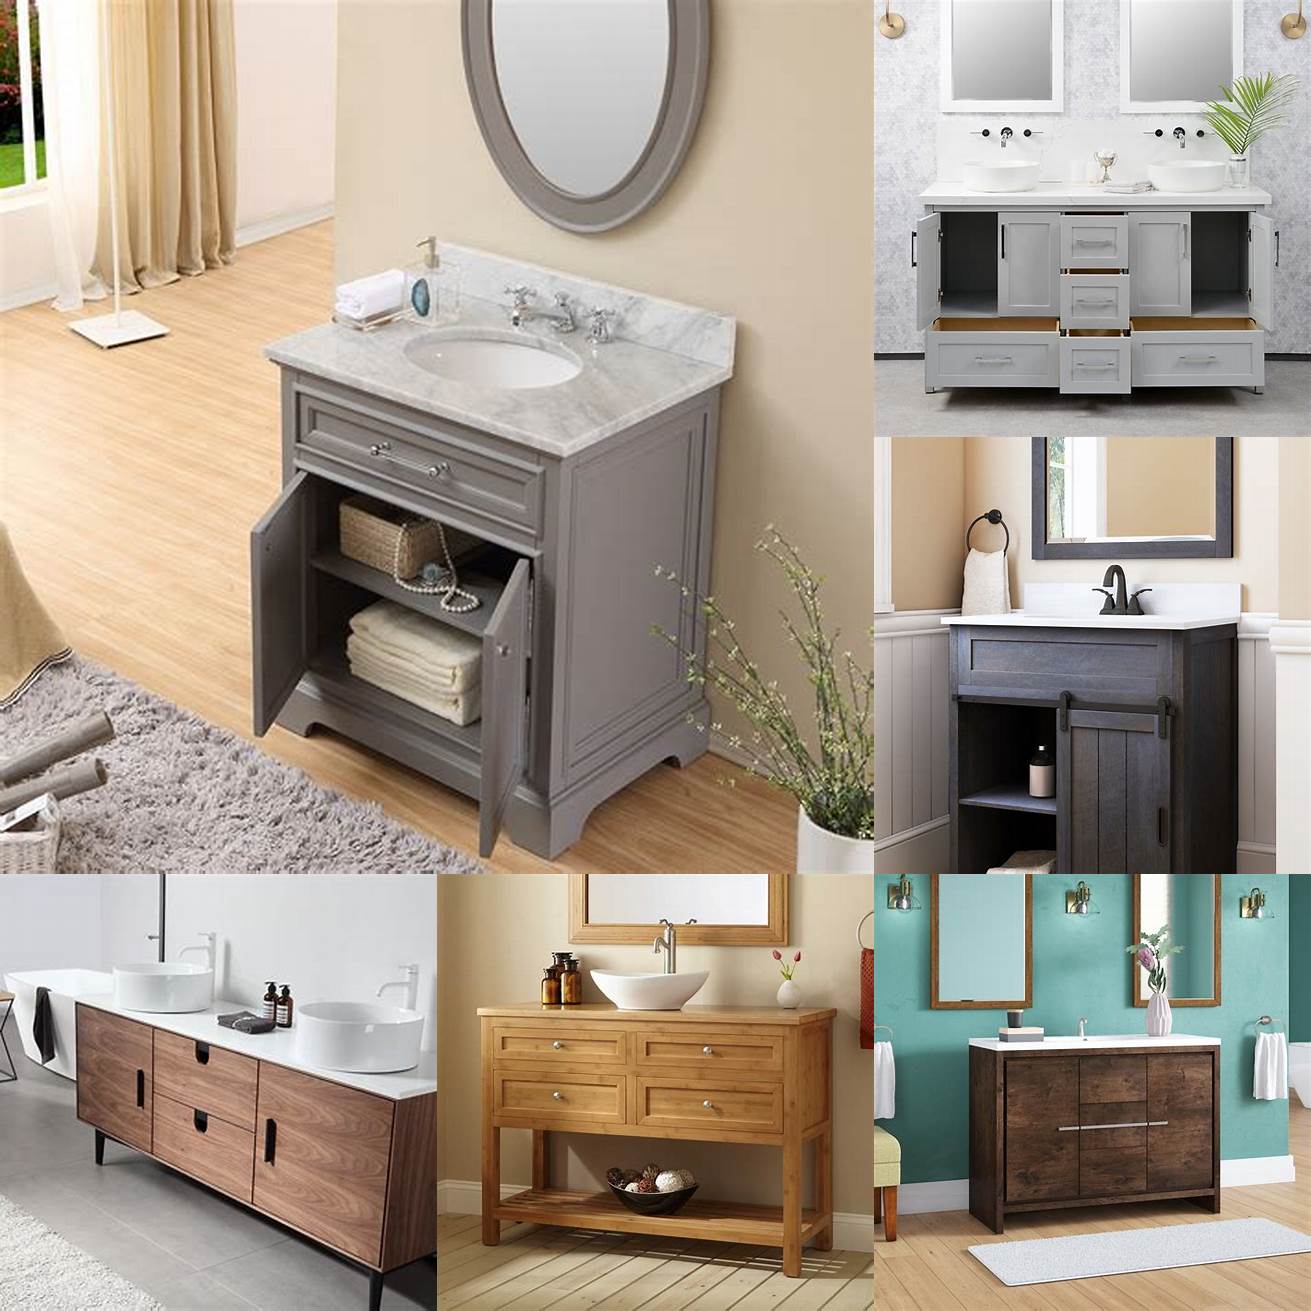 Freestanding vanities are the most common type of bathroom vanities They come in different styles and sizes and they can be made of different materials such as wood metal and glass They are easy to install and provide ample storage space However they take up more floor space than other types of vanities